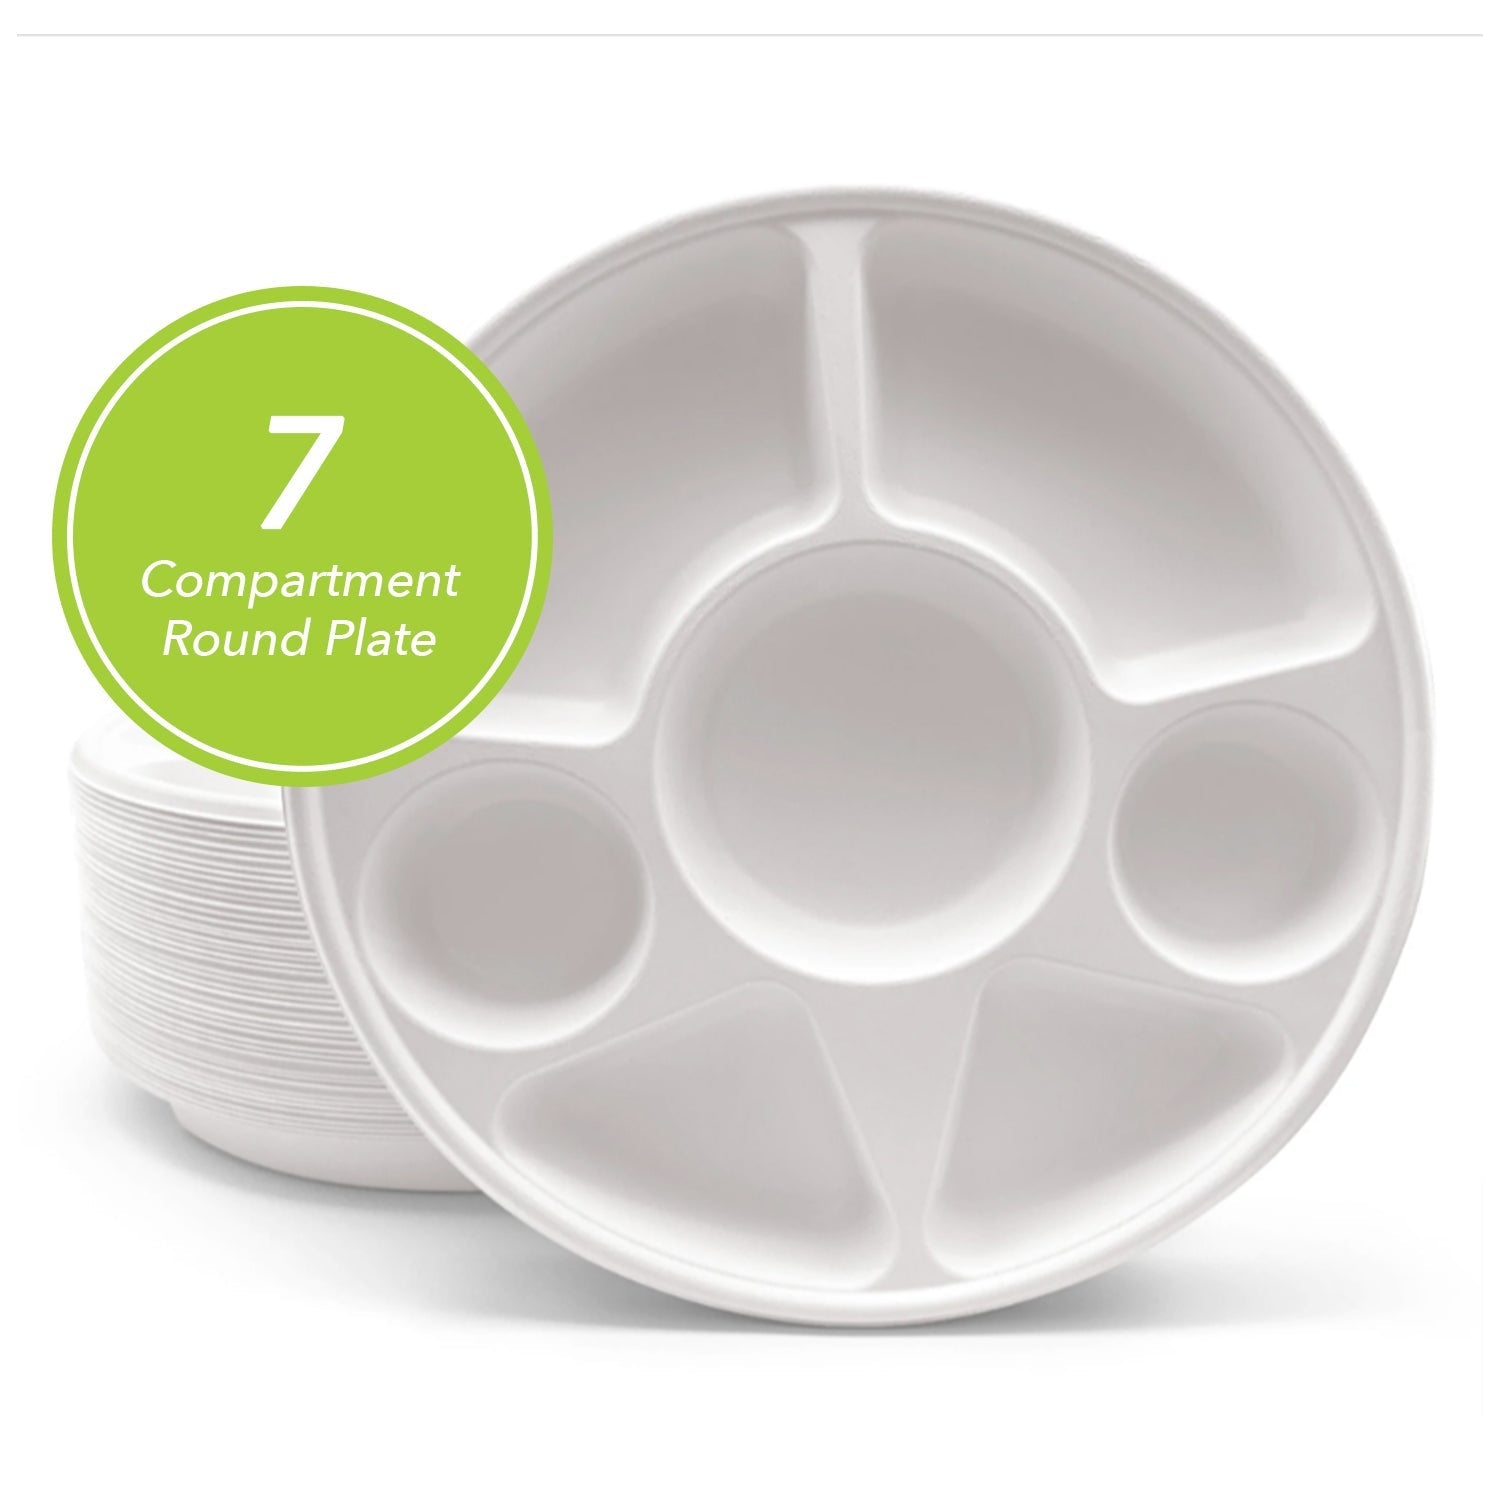 THREE LEAF 7 COMPARTMENT BAGASSE ROUND PLATE, 200 Ct. (8 PACKS OF 25)